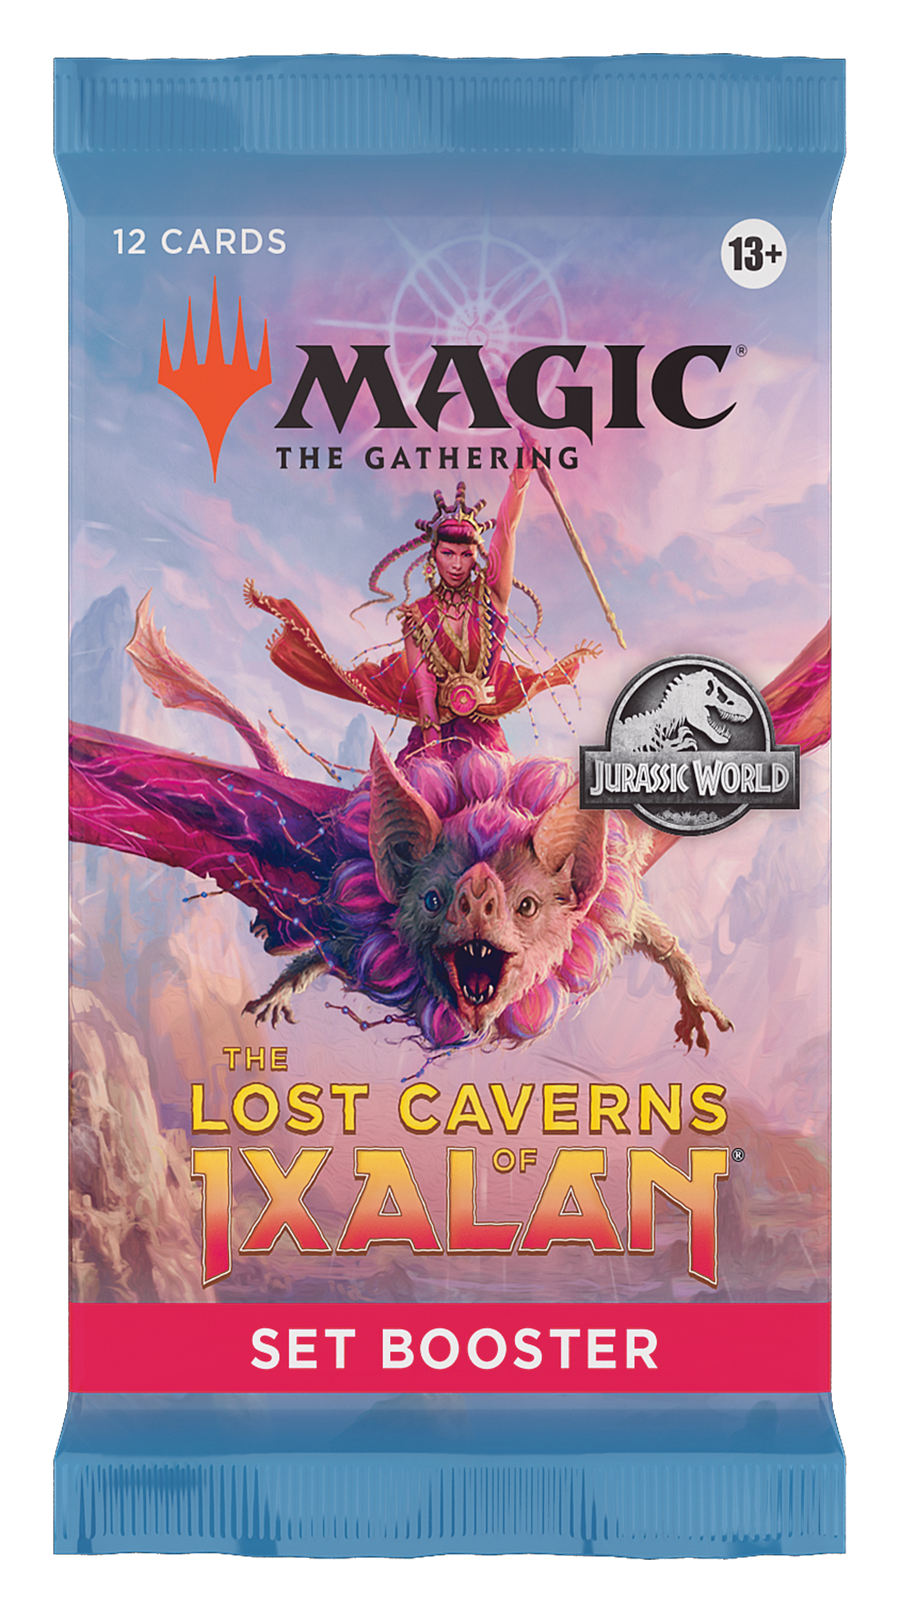 The Lost Caverns of Ixalan - Set Booster Pack